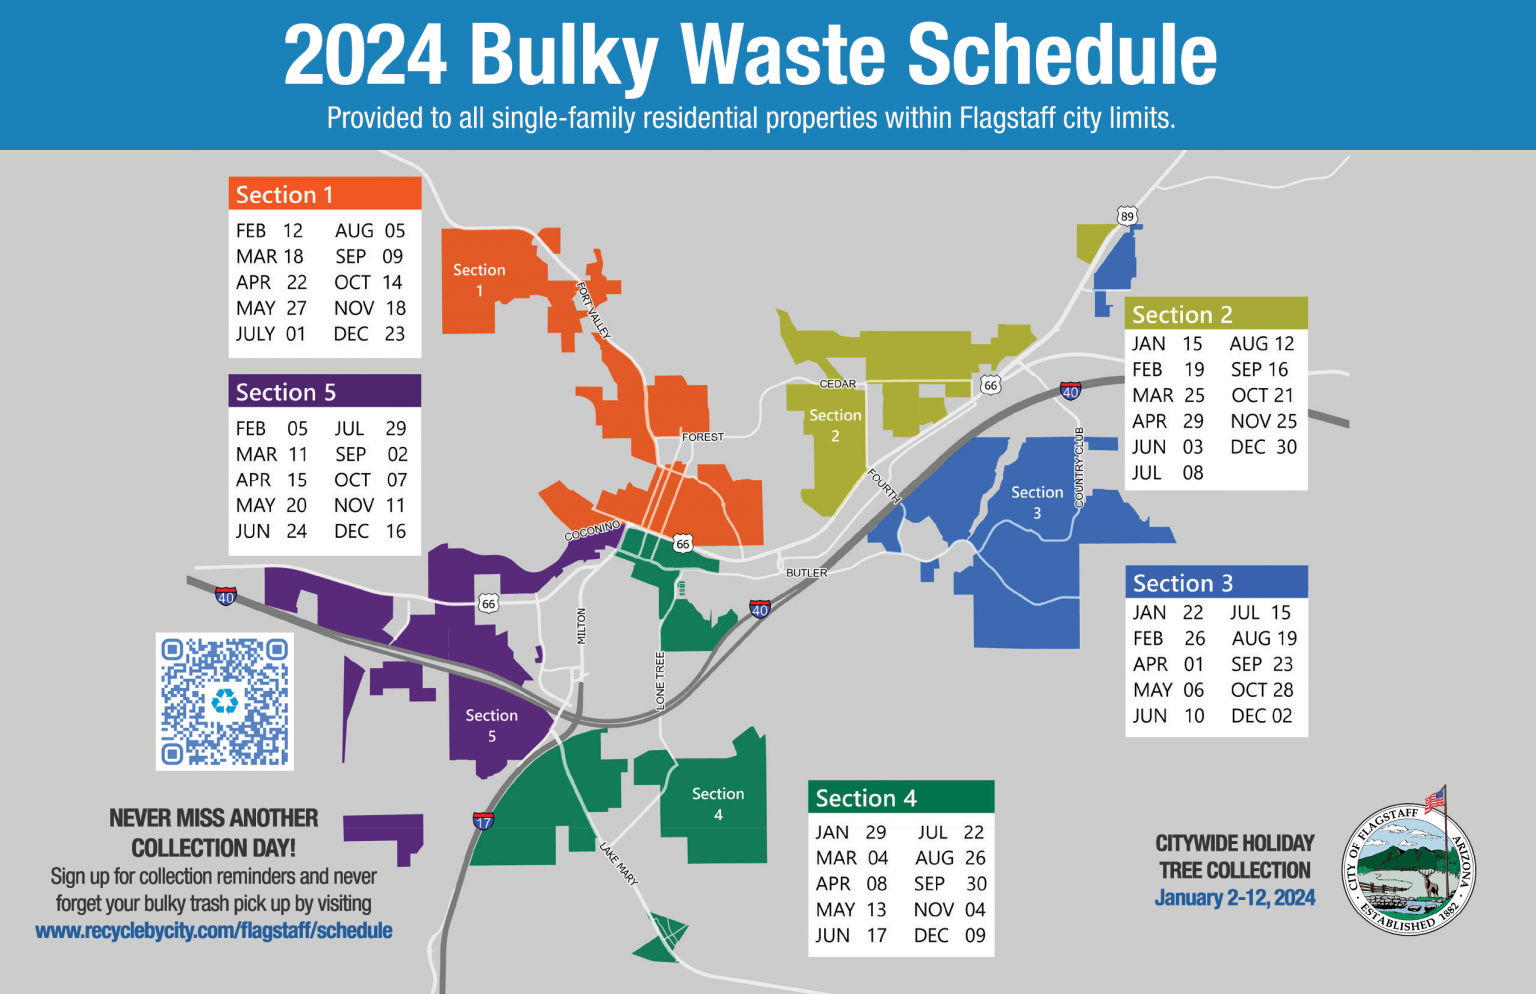 Flagstaff Bulky Waste Collection Schedule MyRadioPlace